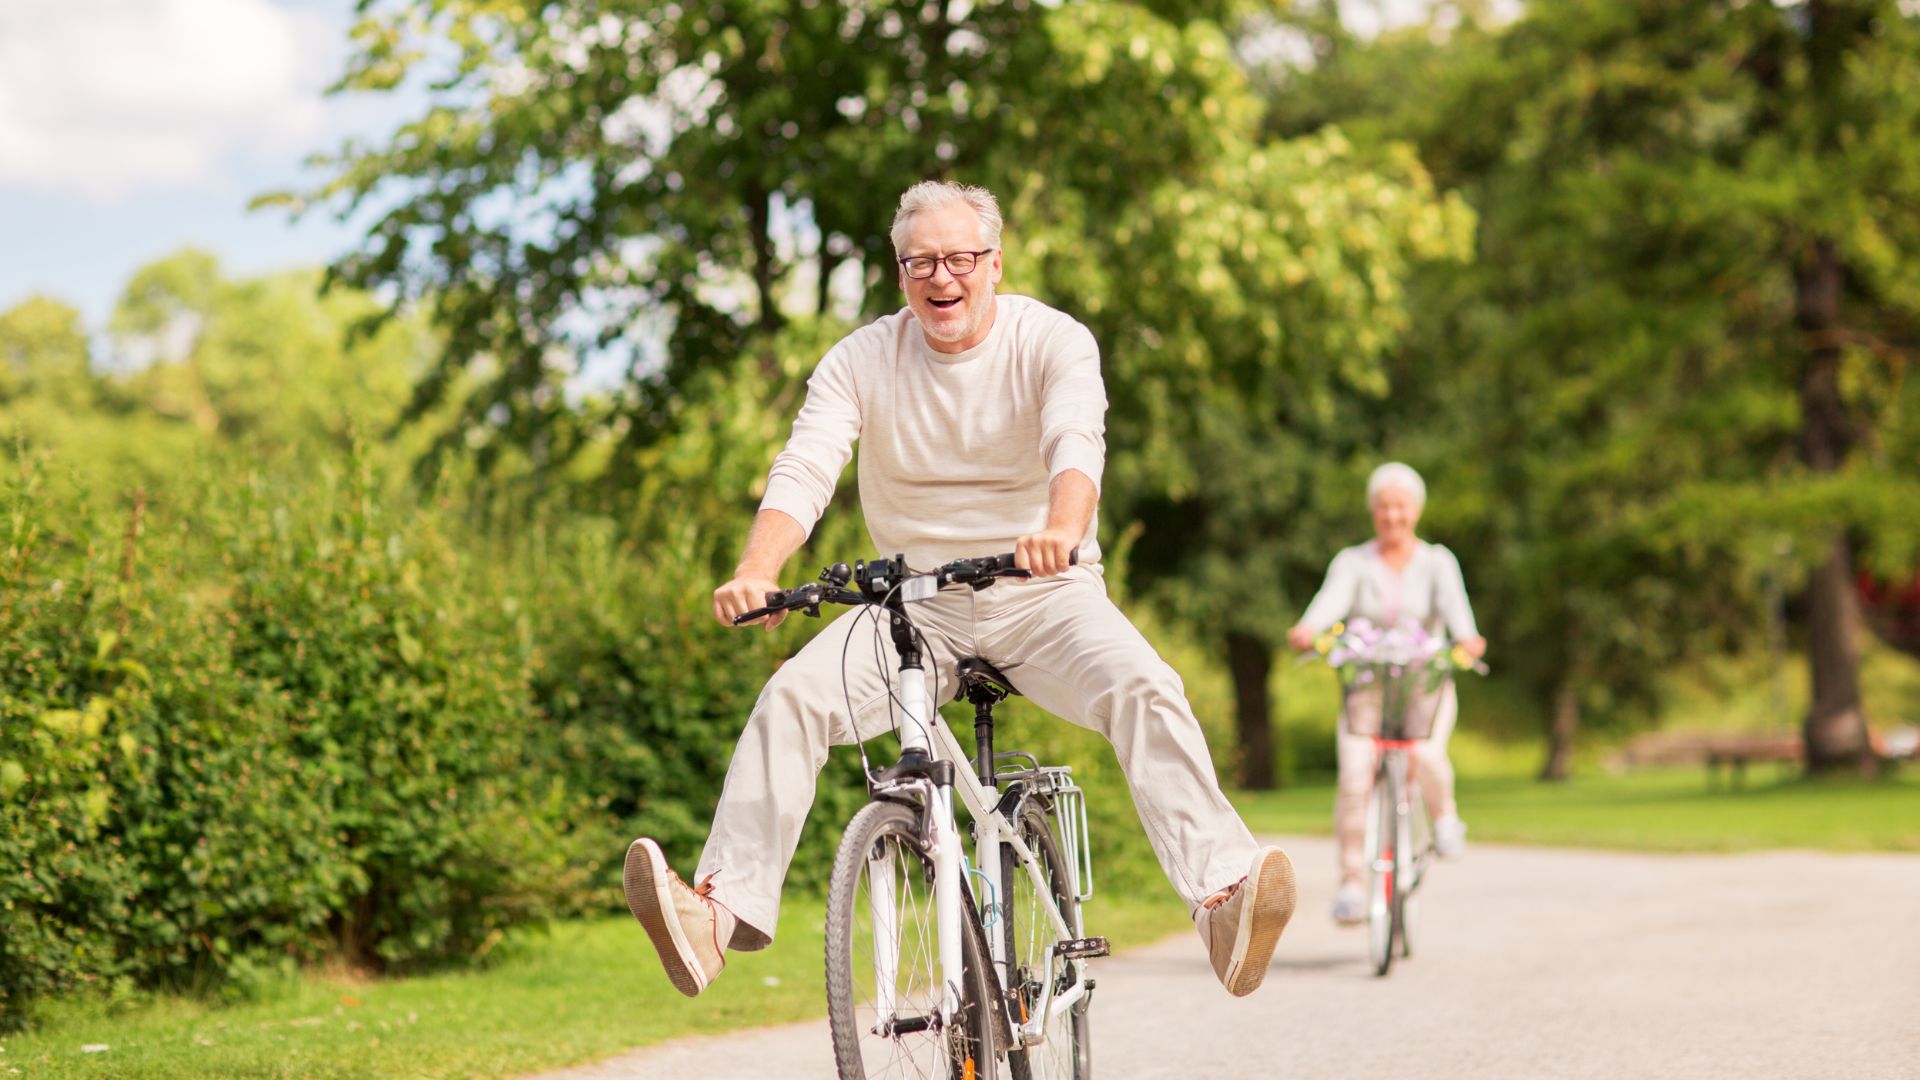 How to Maintain Independence in Senior Community Housing